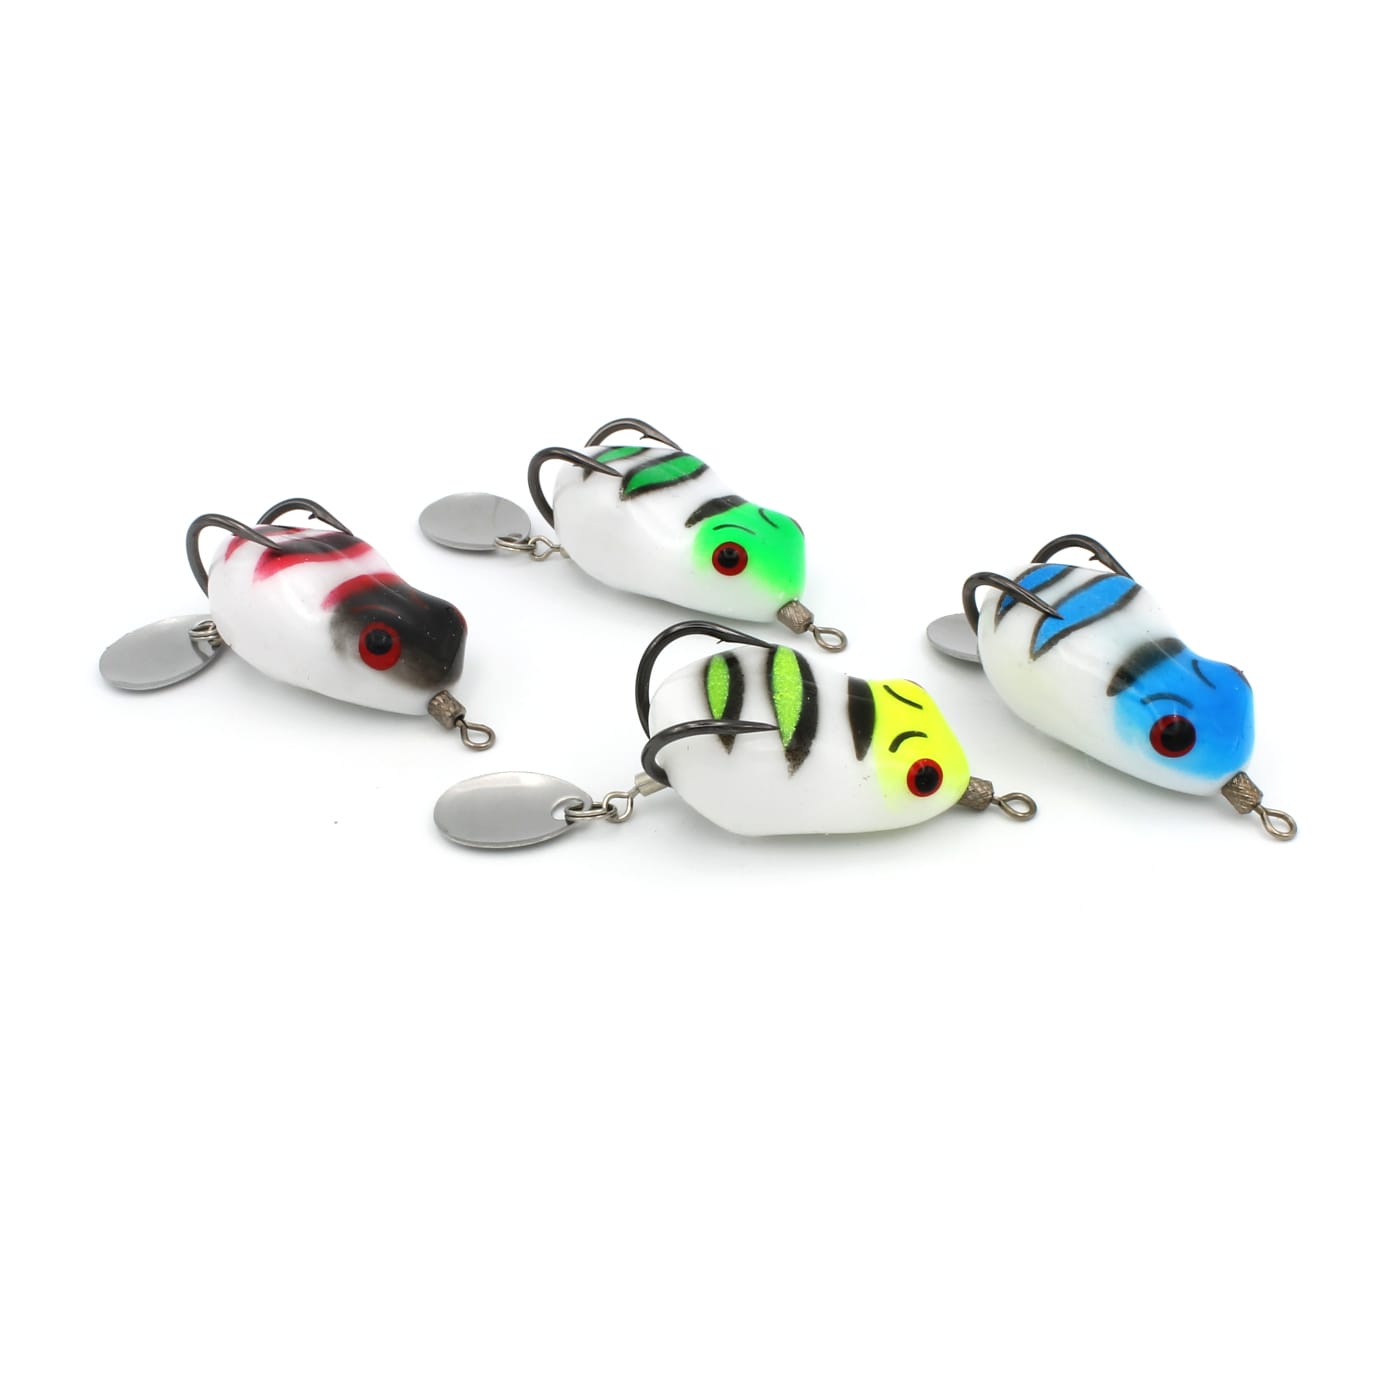  Sanhu Topwater Frogs Baits 4 Pieces Combo B : Sports & Outdoors